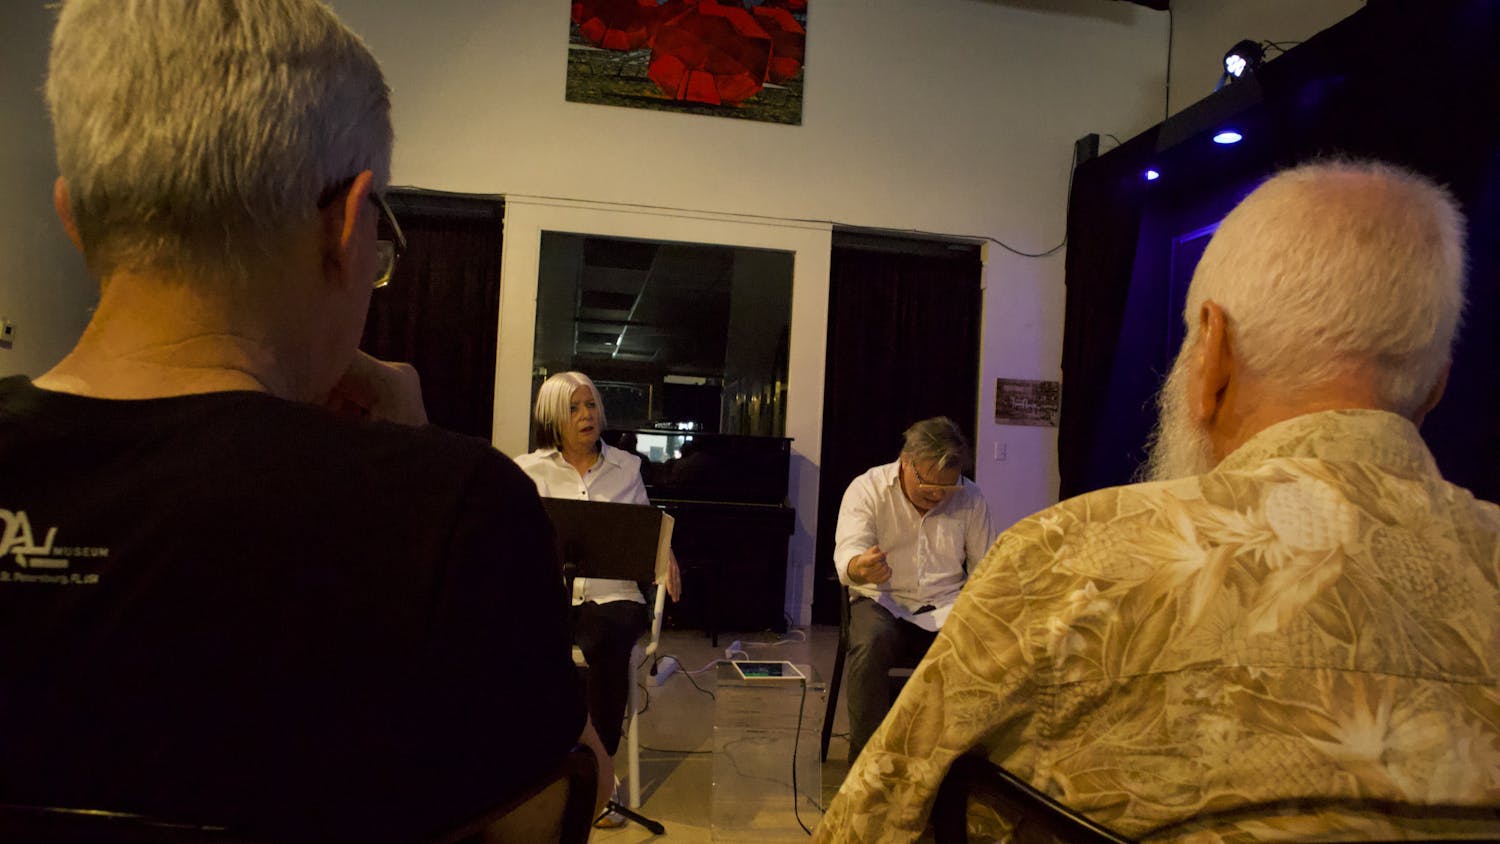  Lauren Warhol Caldwell and Tom Miller perform in “Jack and Jill Go Downtown” at Black C Art Gallery Wednesday, July 20, 2022.